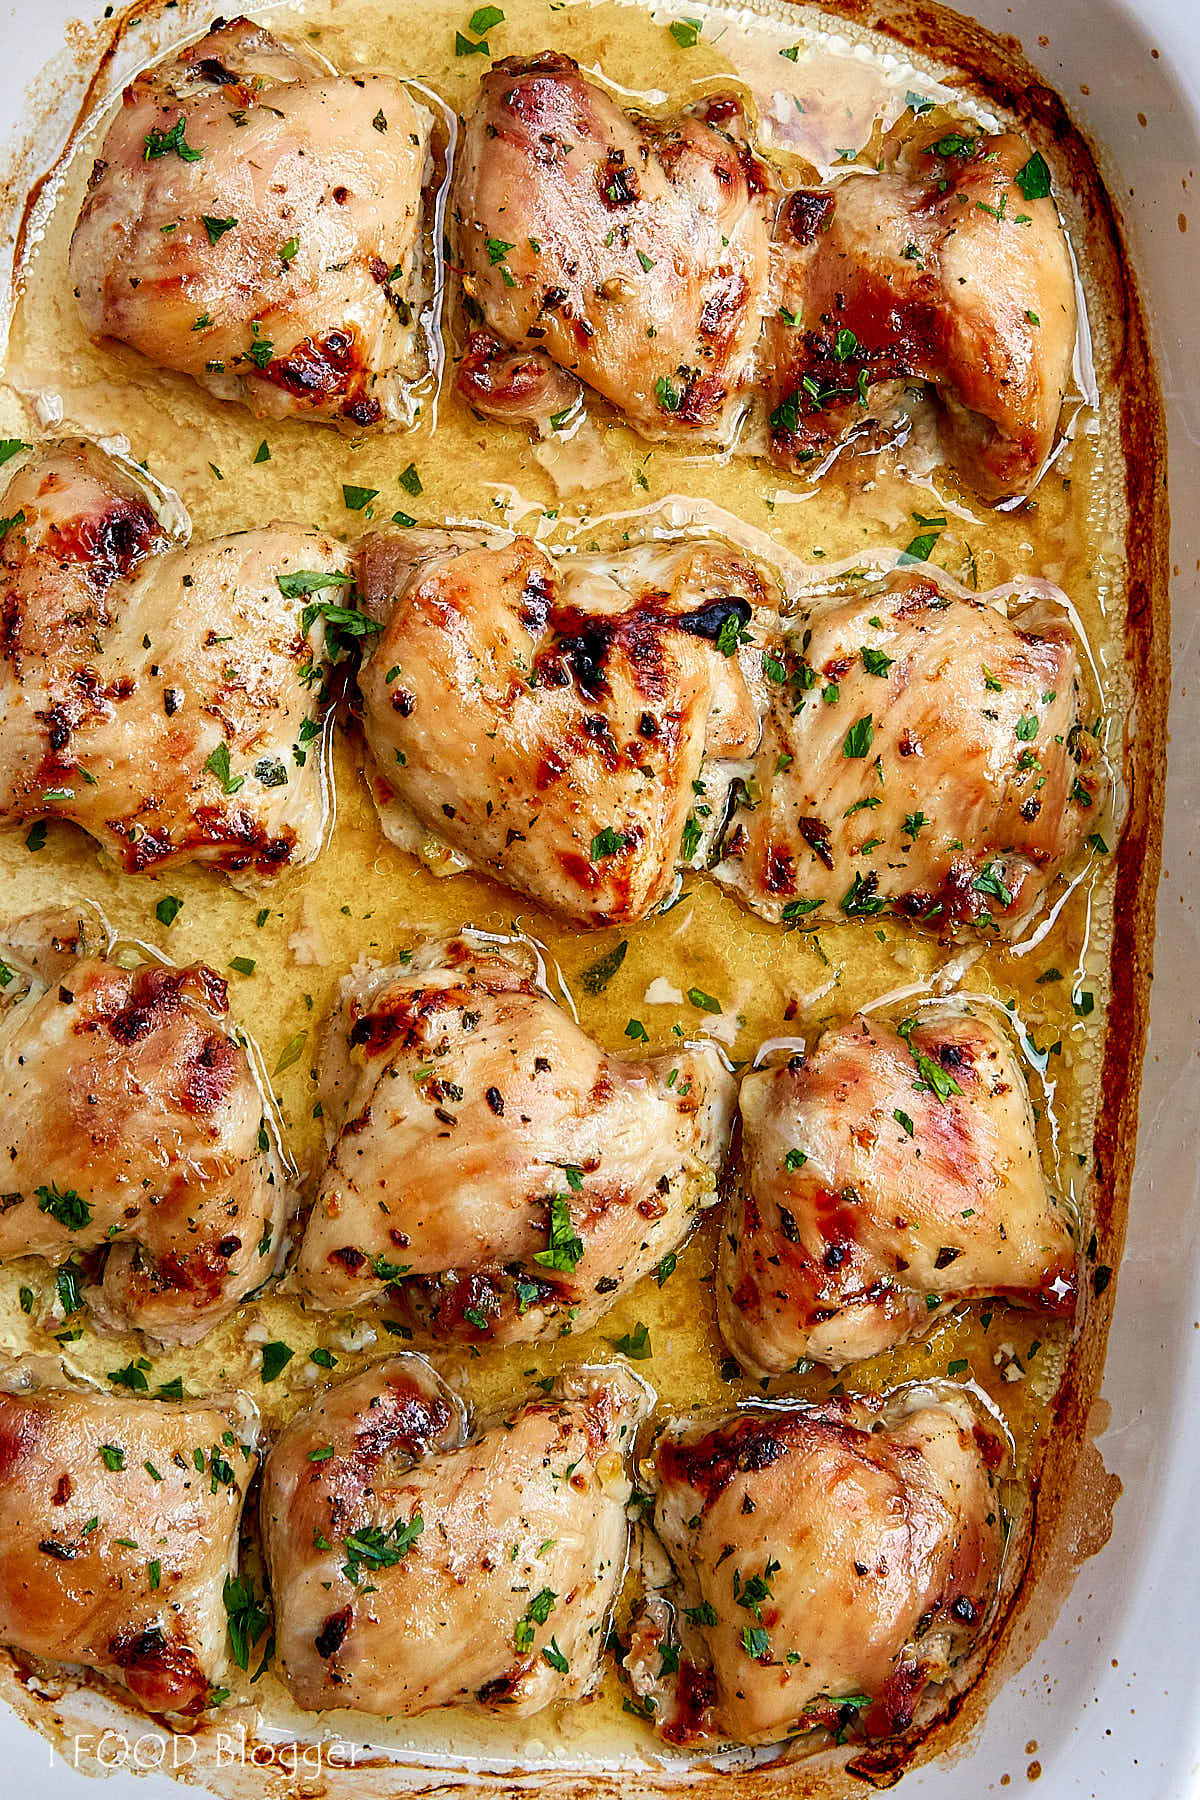 Top 21 Boneless Chicken Thigh Recipe Baked - Home, Family, Style and ...